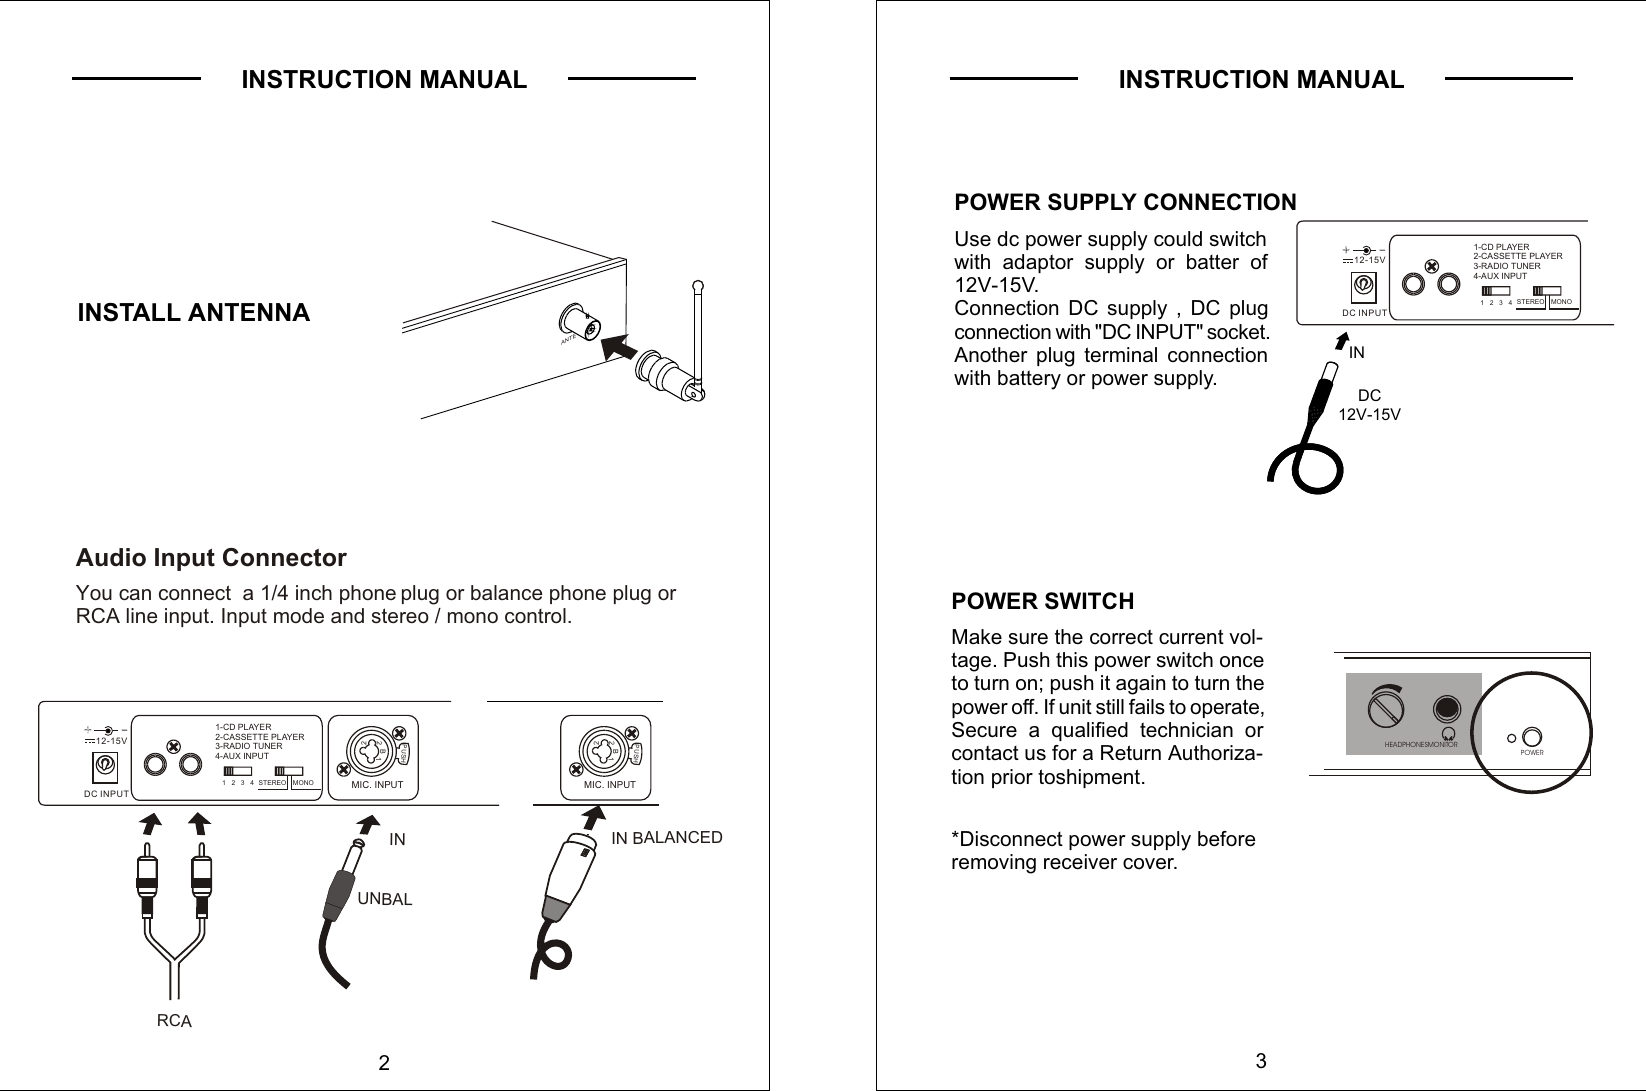 2INSTRUCTION MANUALINSTALL ANTENNAAudio Input Connector     You can connect  a 1/4 inch phone  plug or balance phone plug or     RCA line input. Input mode and stereo / mono control.UNBALINANTEDC INPUT     12-15V+         +         --PUSH22   B    1MIC. INPUT1-CD PLAYER2-CASSETTE PLAYER3-RADIO TUNER4-AUX INPUT1   2   3   4    STEREO  MONOIN BALANCEDPUSH22   B    1MIC. INPUTRCAINSTRUCTION MANUAL3HEADPHONESMONITOR POWERPOWER SUPPLY CONNECTIONUse dc power supply could switch with adaptor supply or batter of 12V-15V. Connection DC supply , DC plug connection with &quot;DC INPUT&quot; socket.Another plug terminal connection with battery or power supply. DC12V-15VINPOWER SWITCHMake sure the correct current vol-tage. Push this power switch onceto turn on; push it again to turn the power off. If unit still fails to operate, Secure a qualified technician or contact us for a Return Authoriza-tion prior toshipment.*Disconnect power supply beforeremoving receiver cover.DC INPUT     12-15V+         +         --1-CD PLAYER2-CASSETTE PLAYER3-RADIO TUNER4-AUX INPUT1   2   3   4    STEREO  MONO